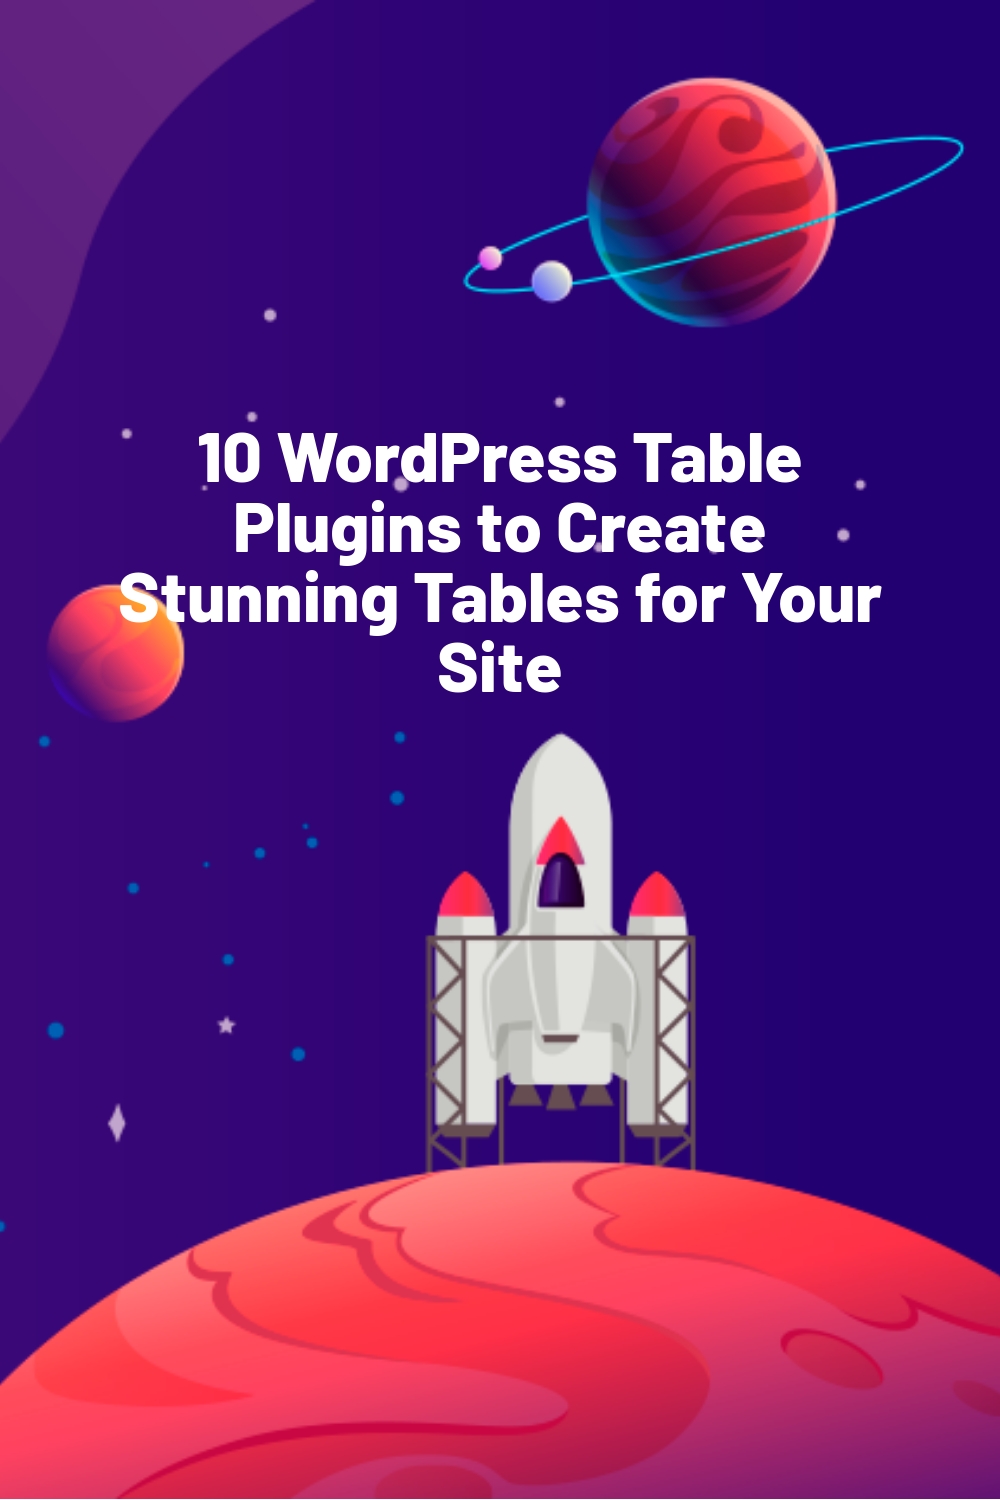 10 WordPress Table Plugins to Create Stunning Tables for Your Site